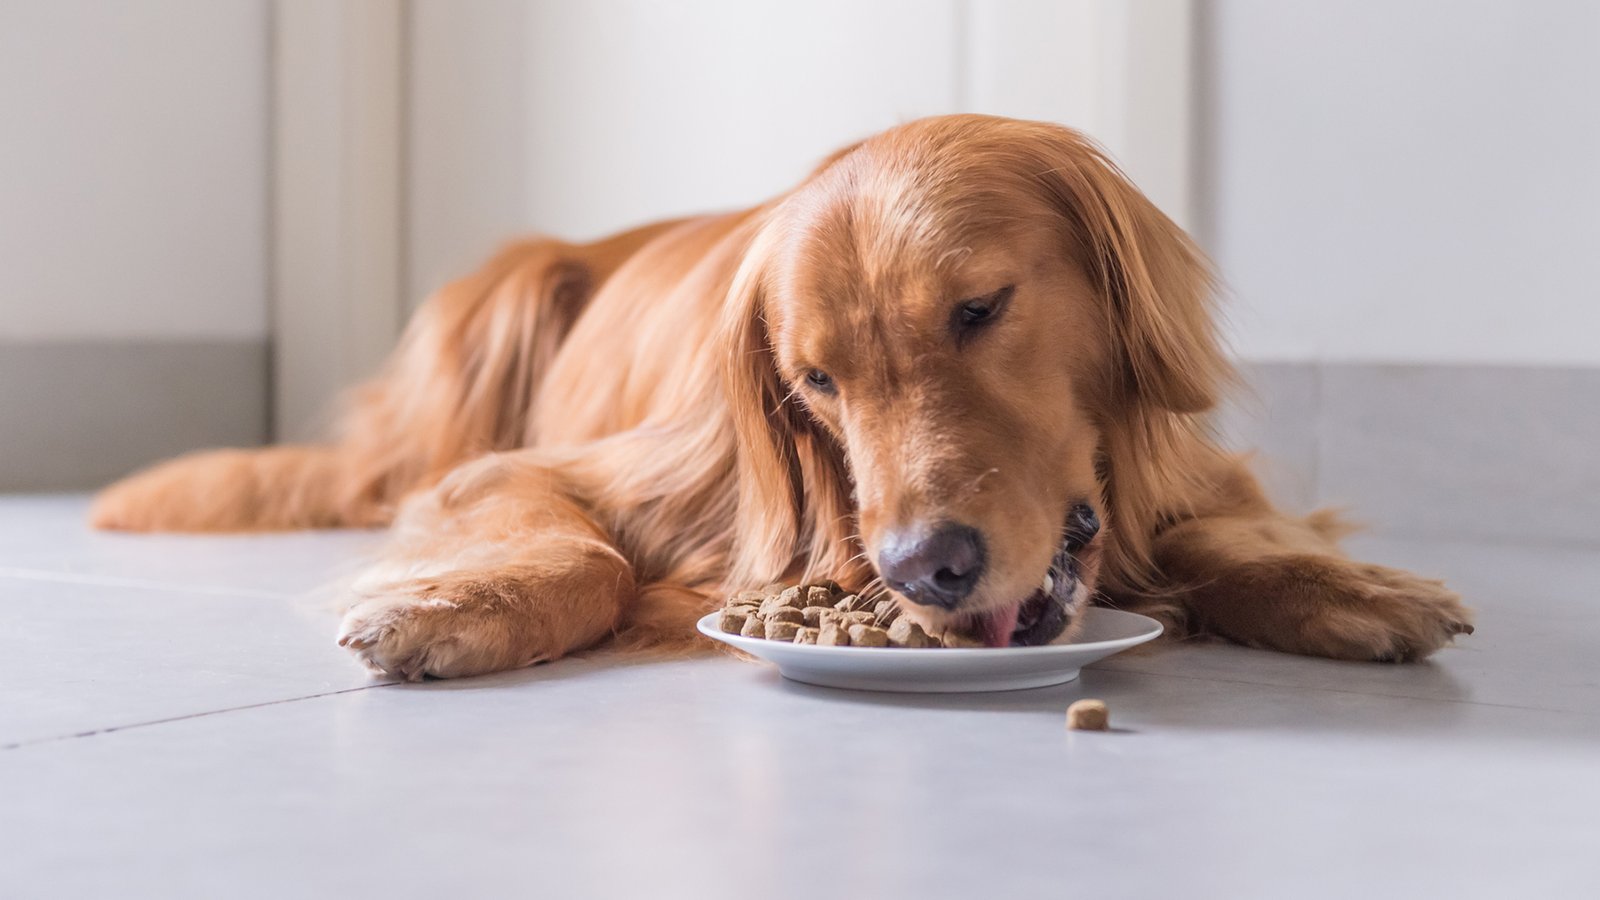 Try A Bland Diet To Soothe Your Dog’s Upset Stomach